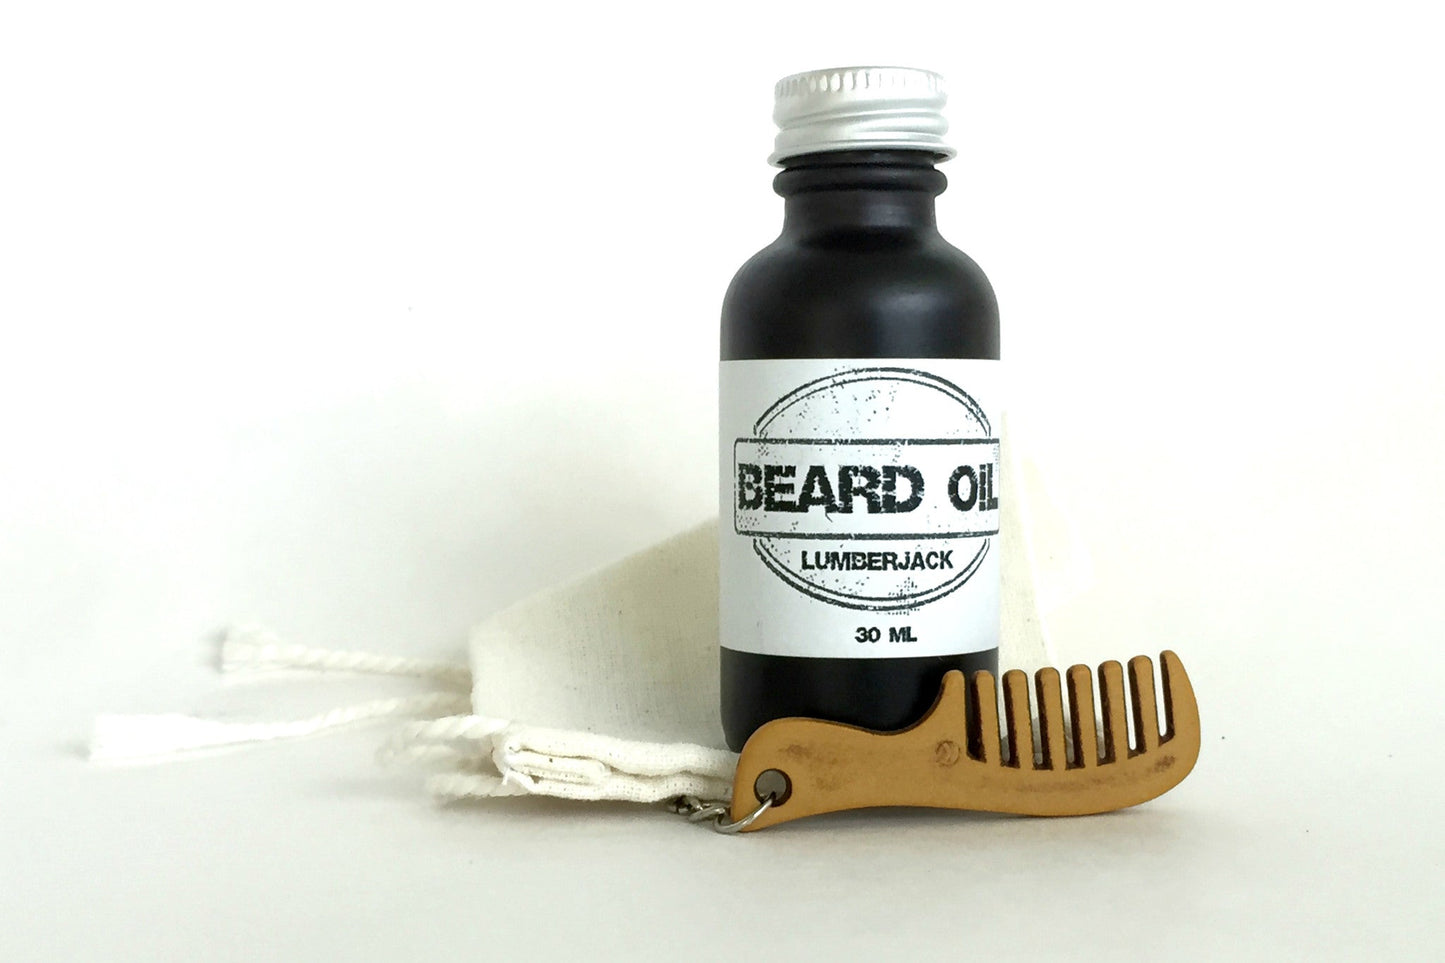 Beard Oil Gift Set | 10 Scents Available